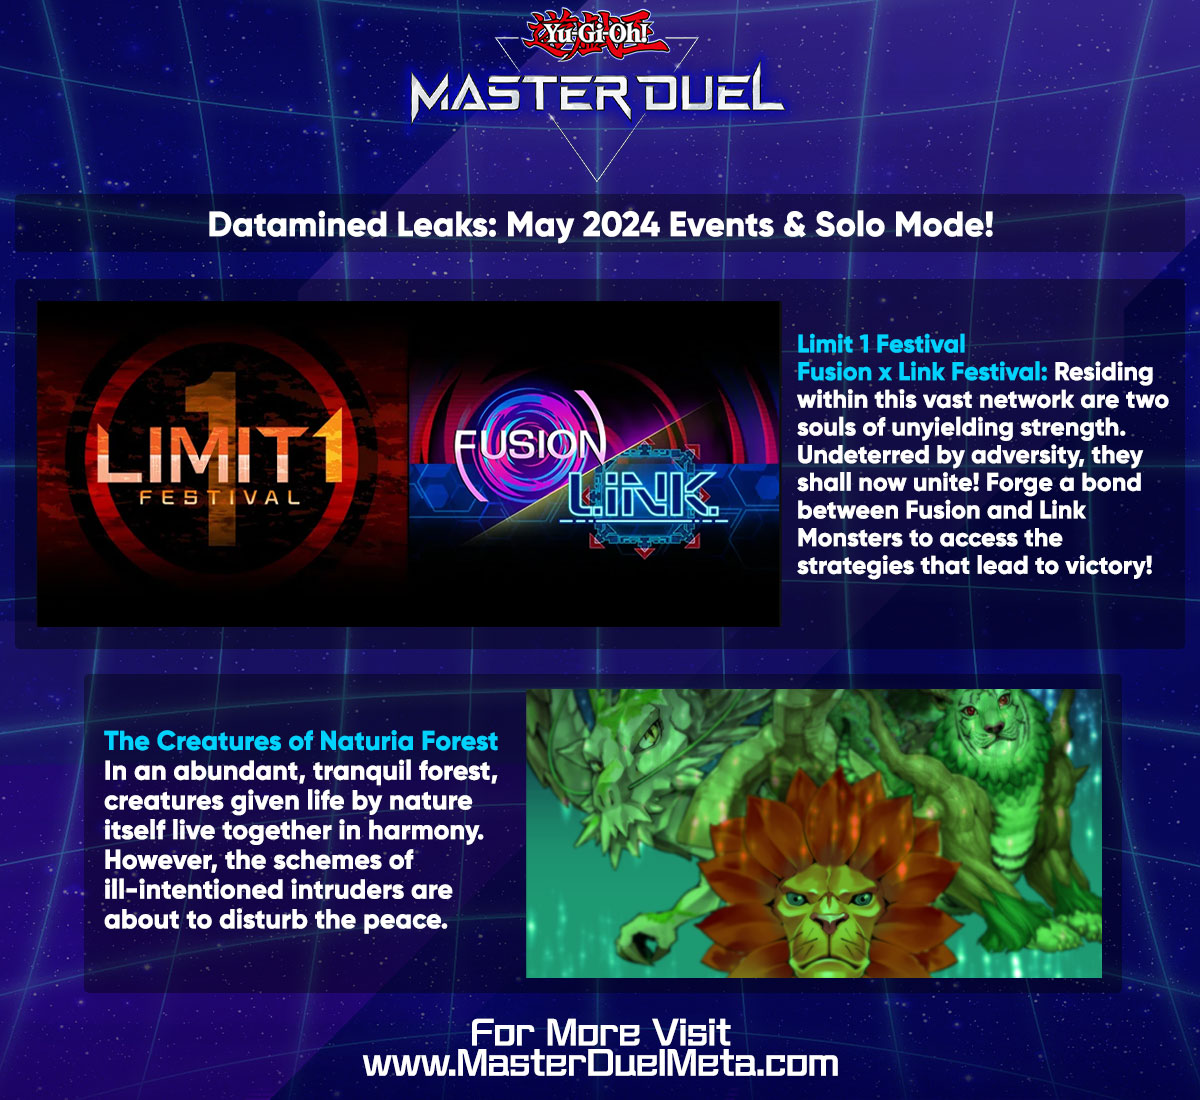 DATAMINED LEAKS: May's Events for Master Duel include the return of the Limit 1 Festival, a Fusion x Link Festival Hybrid and a new Solo Mode for Naturia! More Leaks: masterduelmeta.com/articles/news/… #MasterDuel #YuGiOh #YuGiOhMasterDuel #遊戯王マスターデュエル